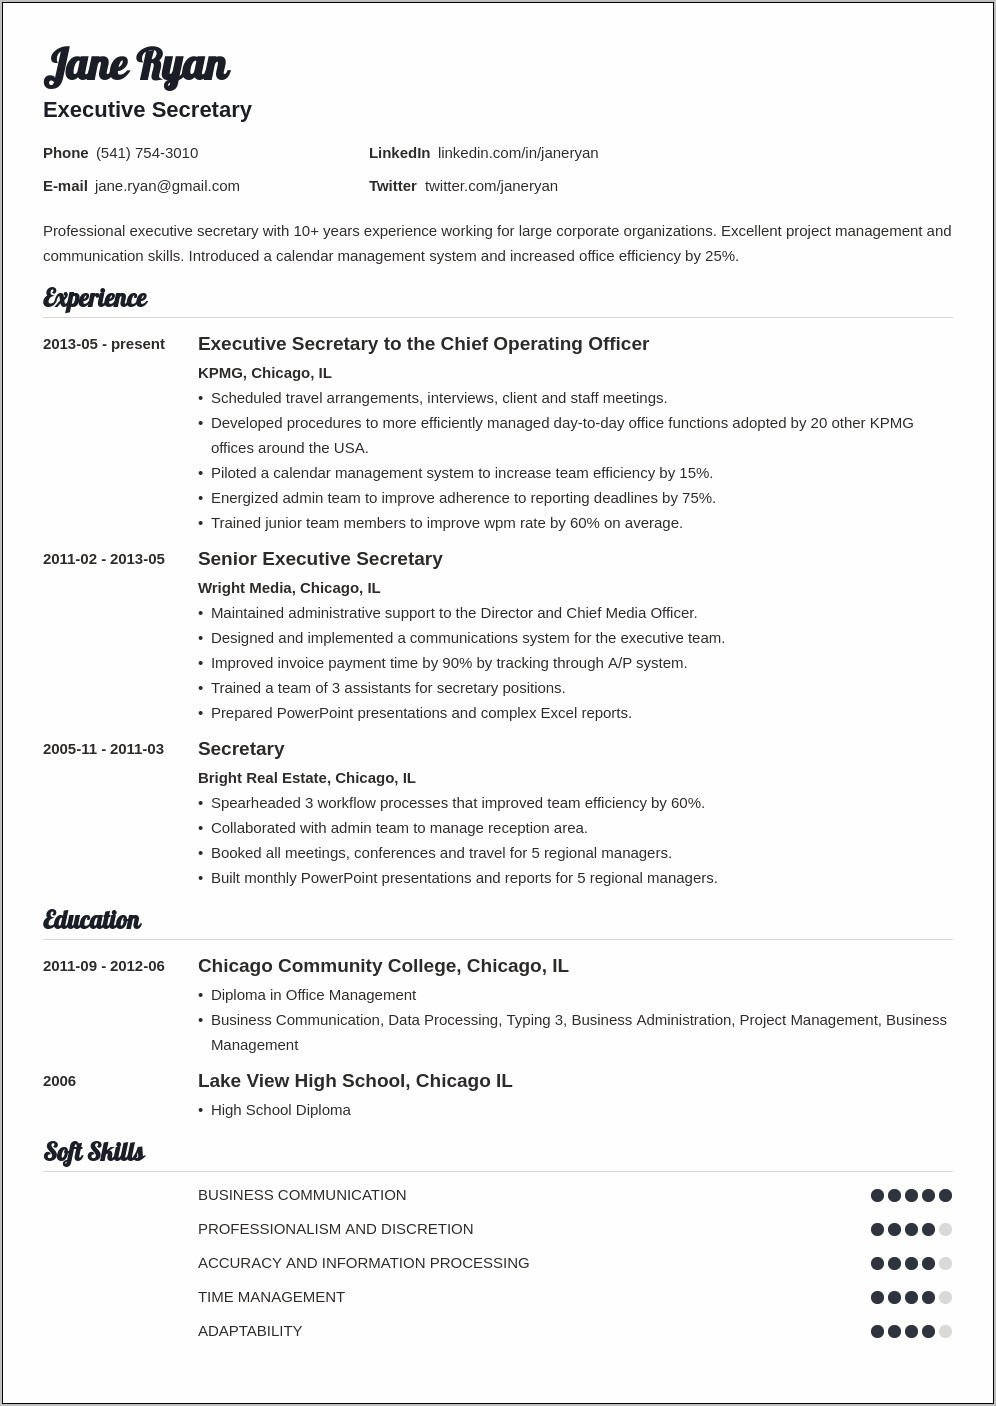 Sample Resume For Secretary With No Experience